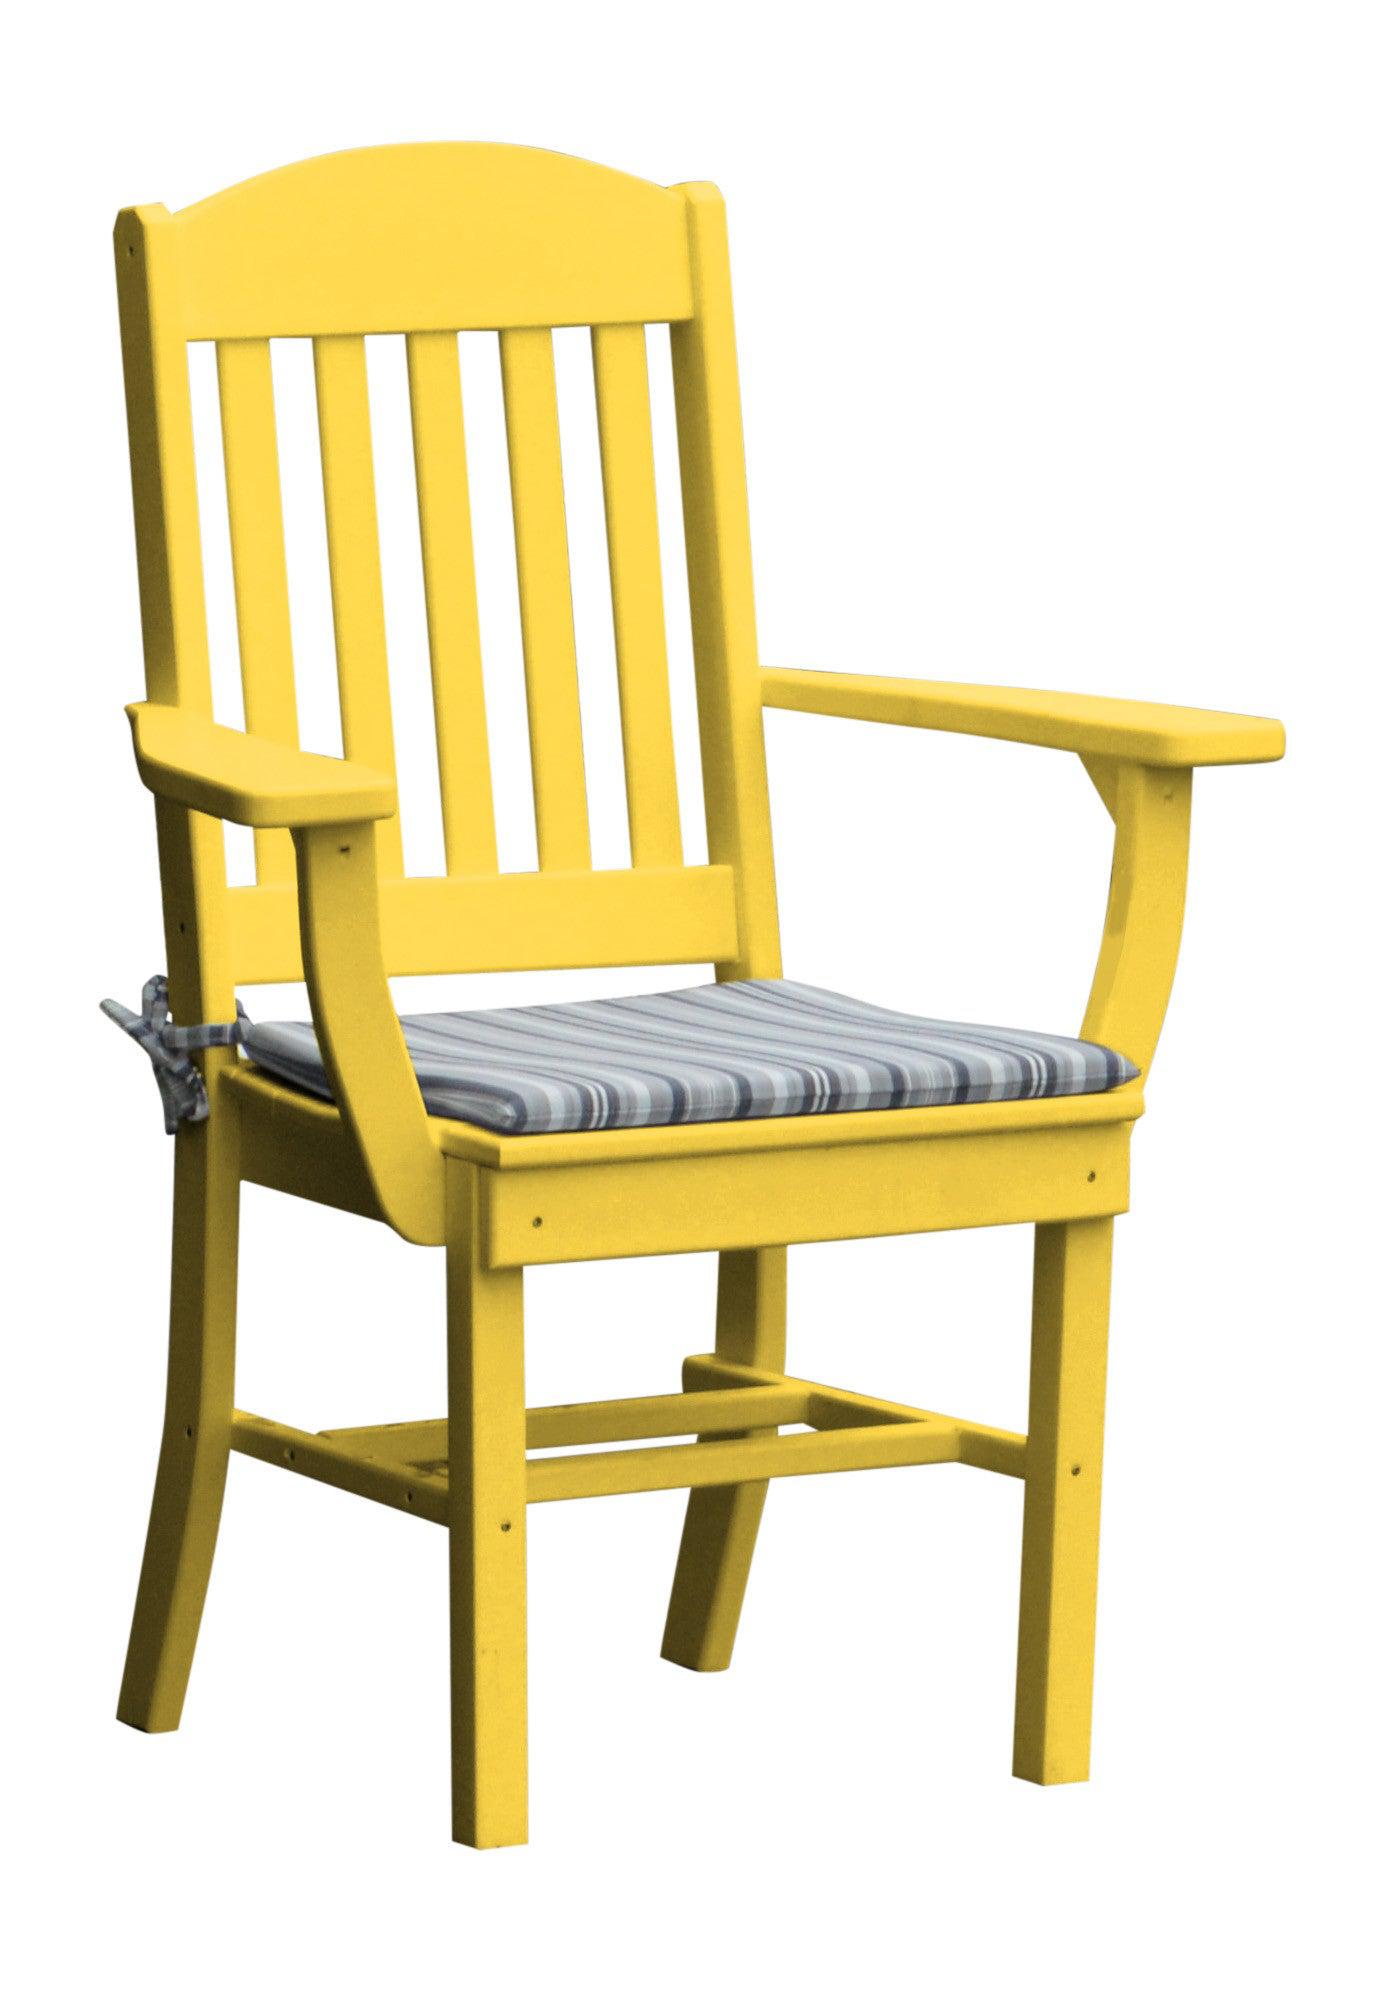 A&L Furniture Company Recycled Plastic Classic Dining Chair w/ Arms - Lemon Yellow